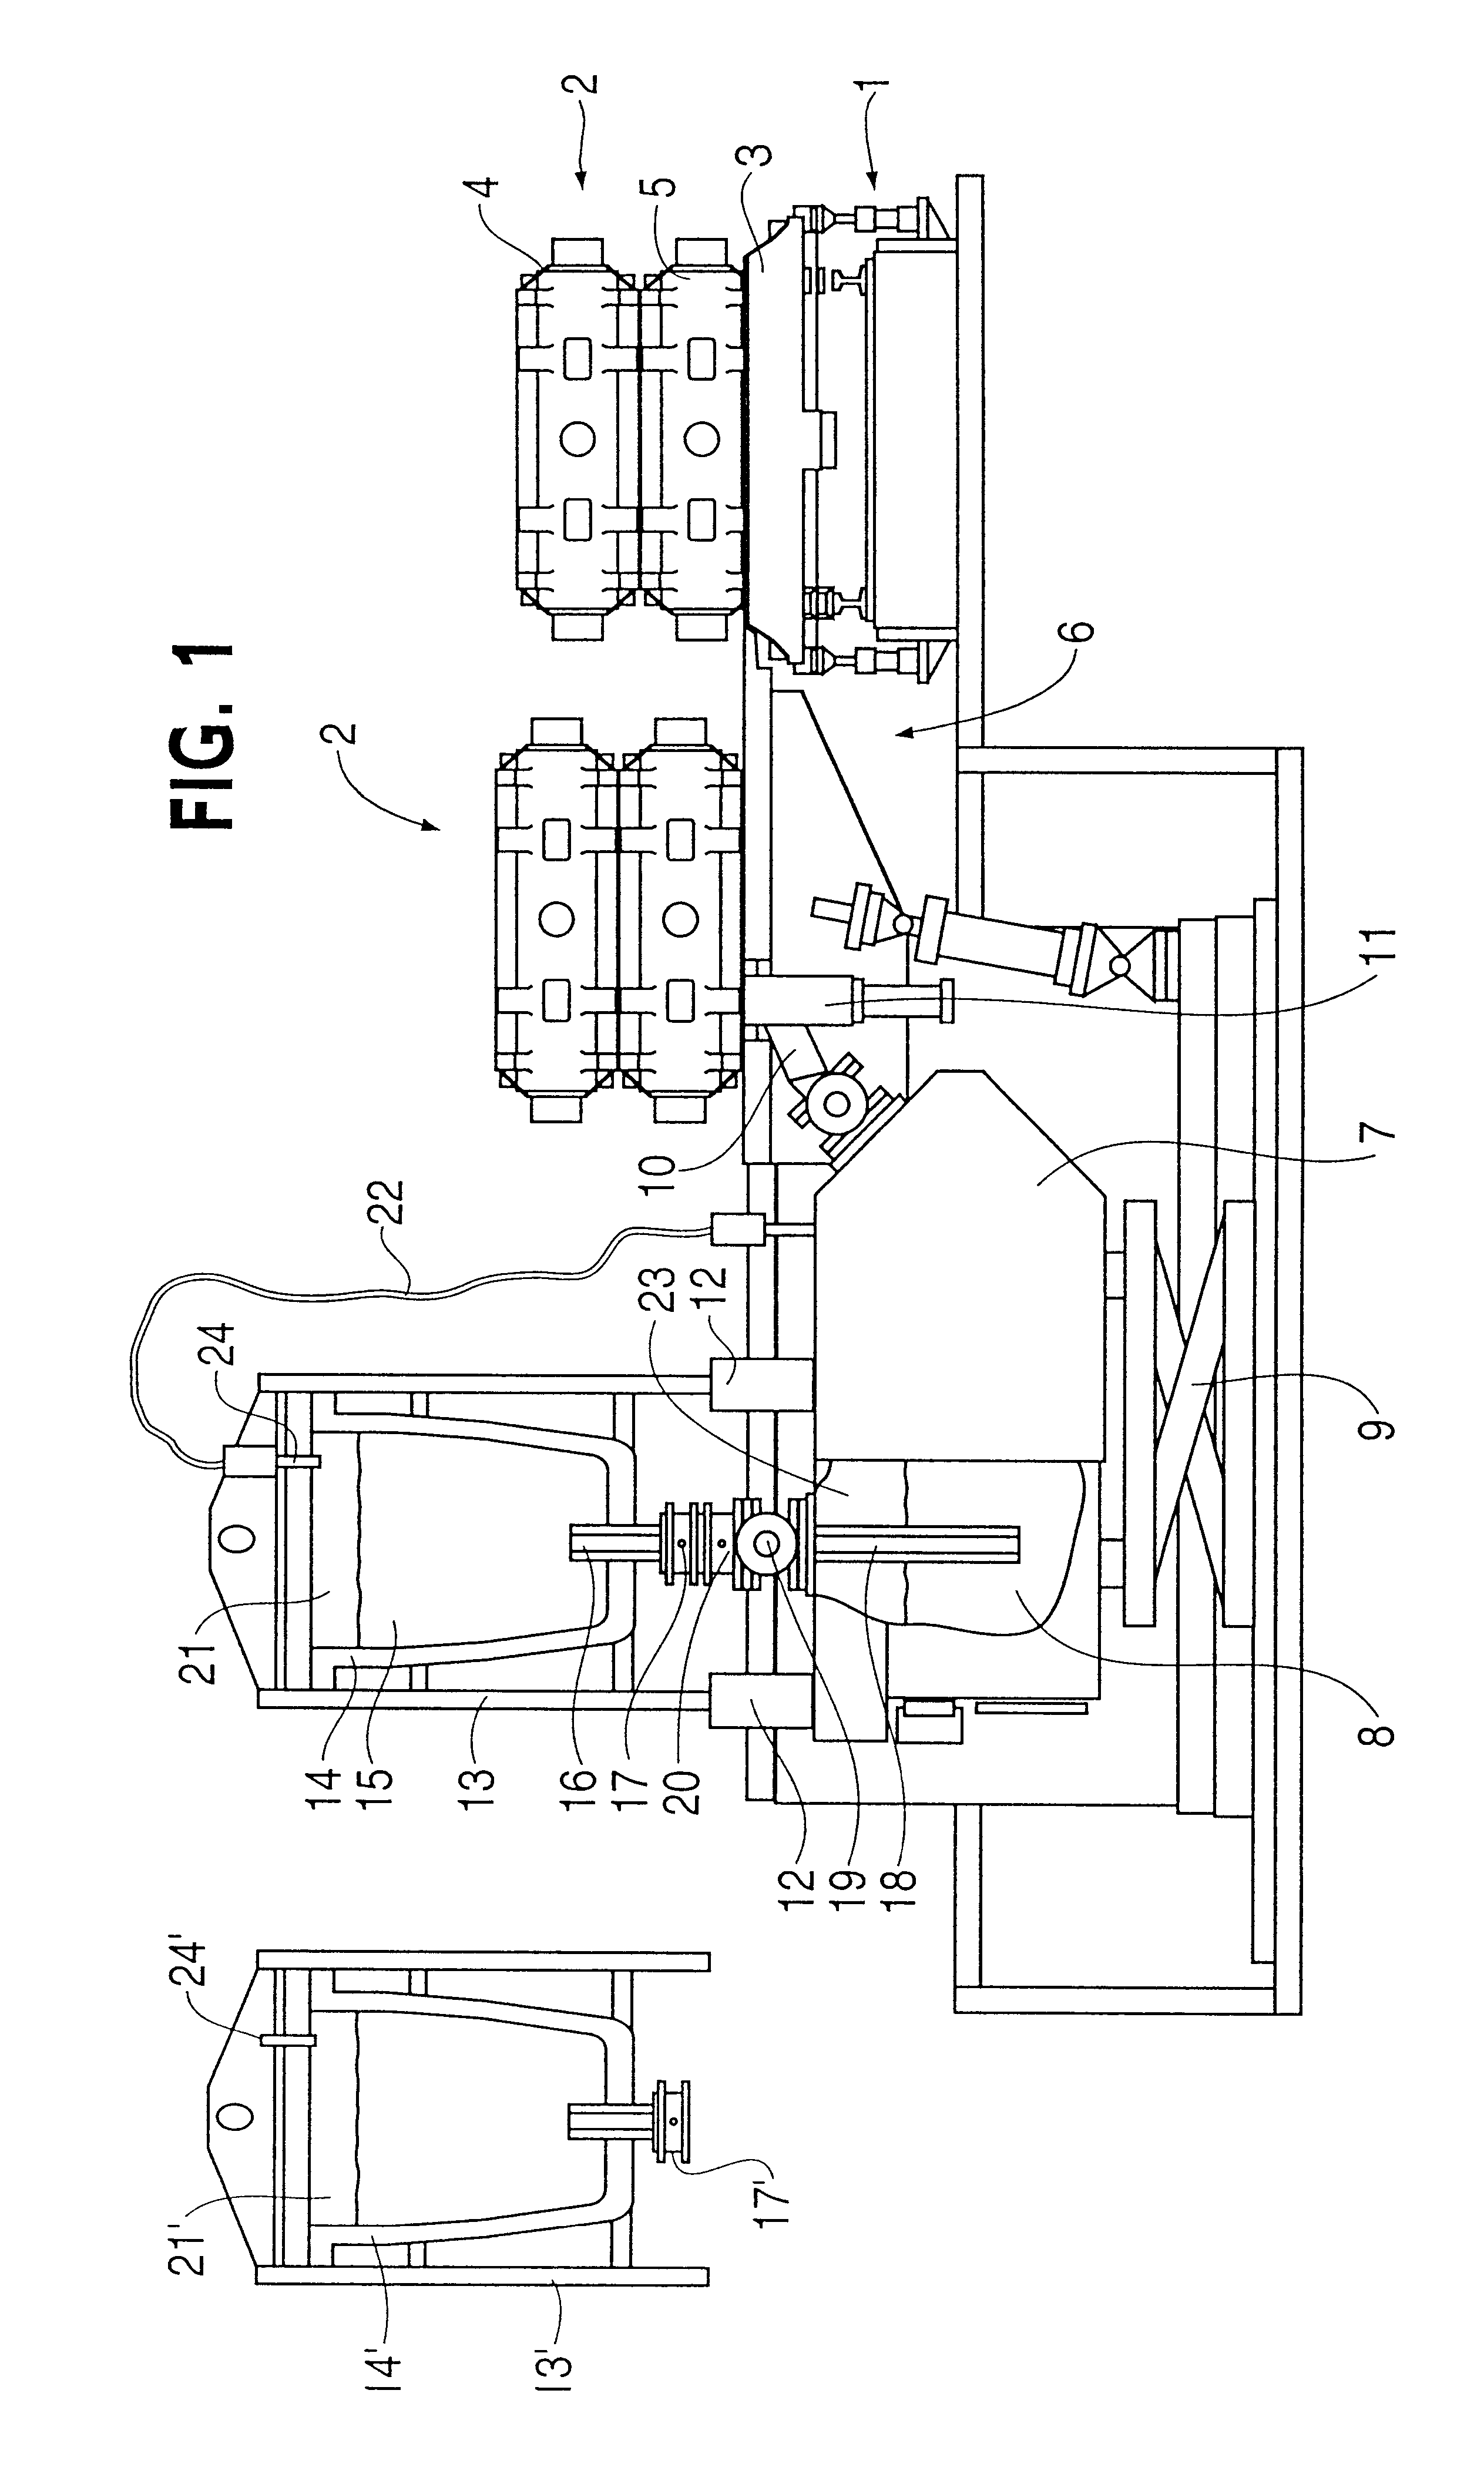 Apparatus for uphill low pressure casting of molten metal